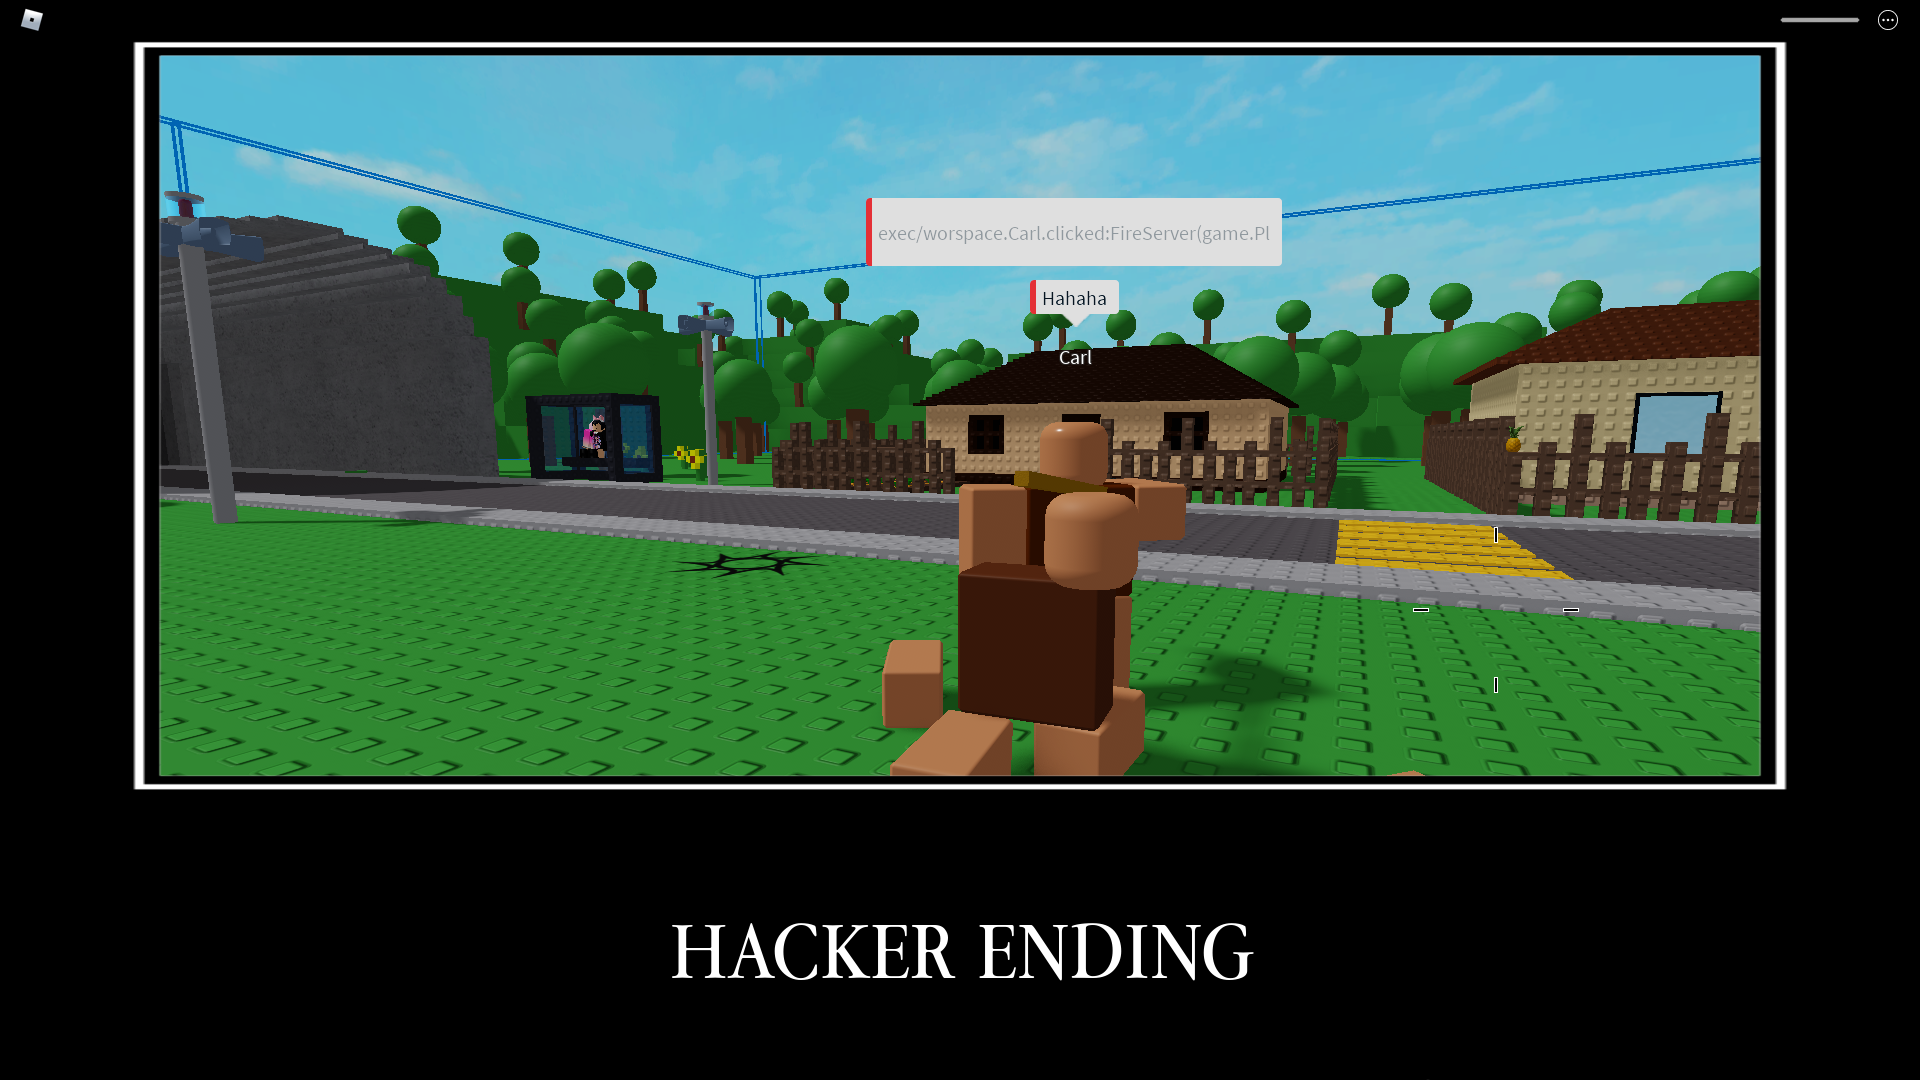 When I was playing Roblox, there was a hacker in my game. Can they